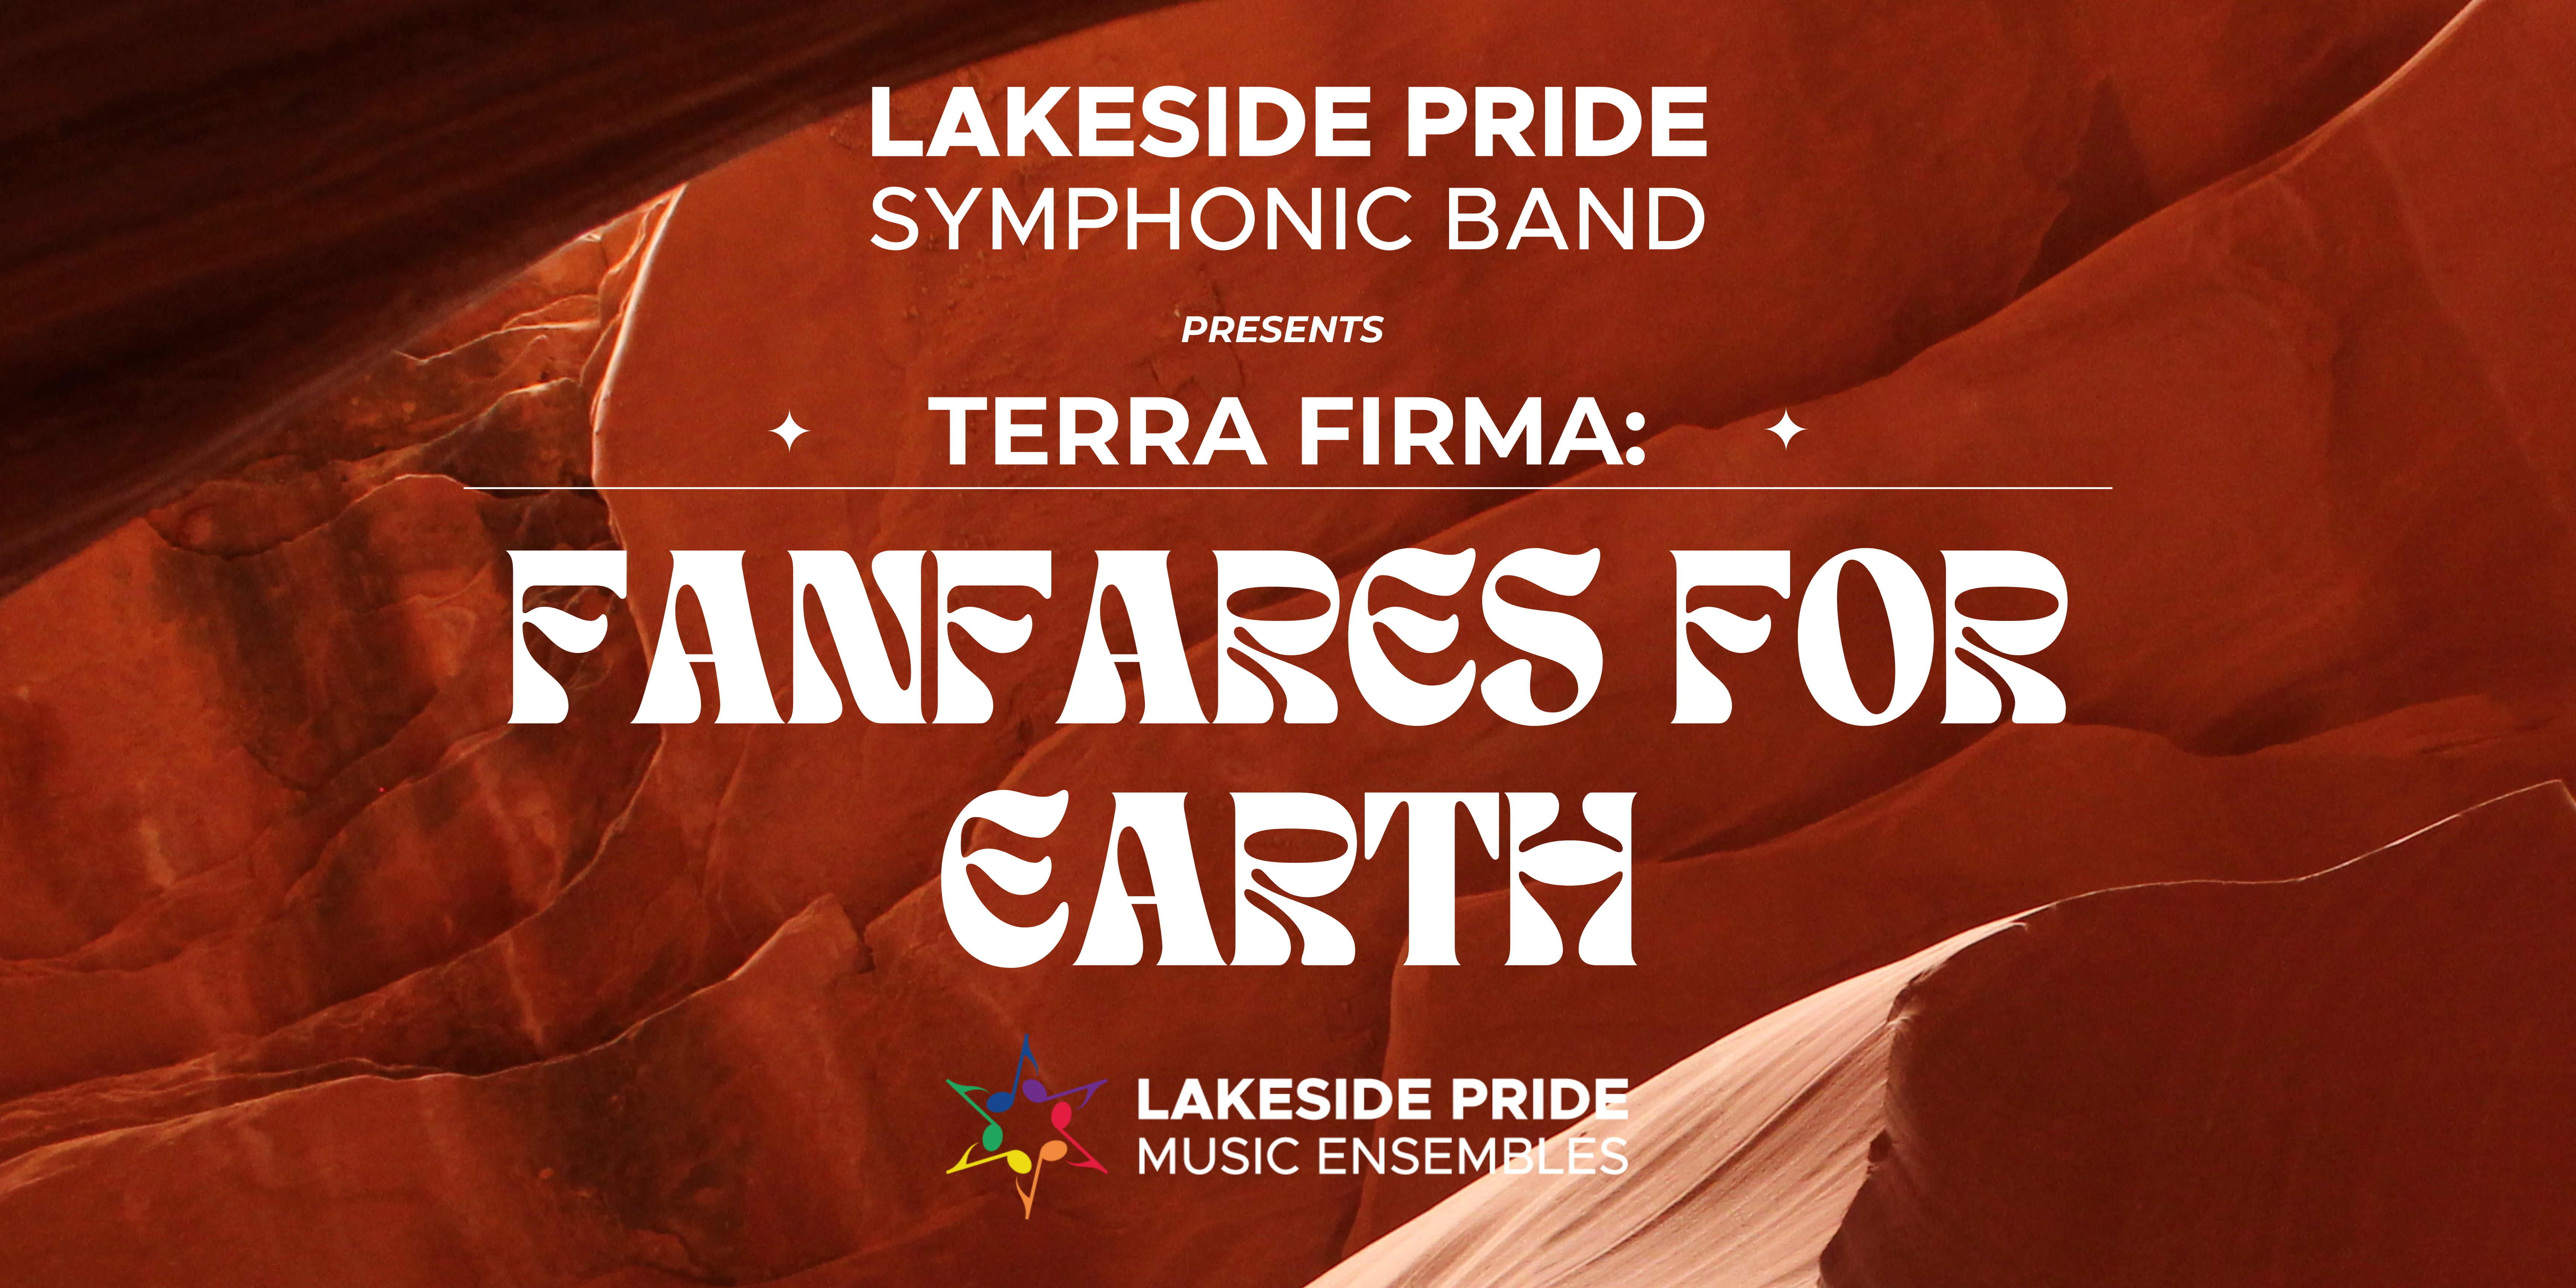 Arizona Sandstone Cave background with the following text overlayed on the cave image: Lakeside Pride Symphonic Band presents Terra Firma: Fanfares for Earth